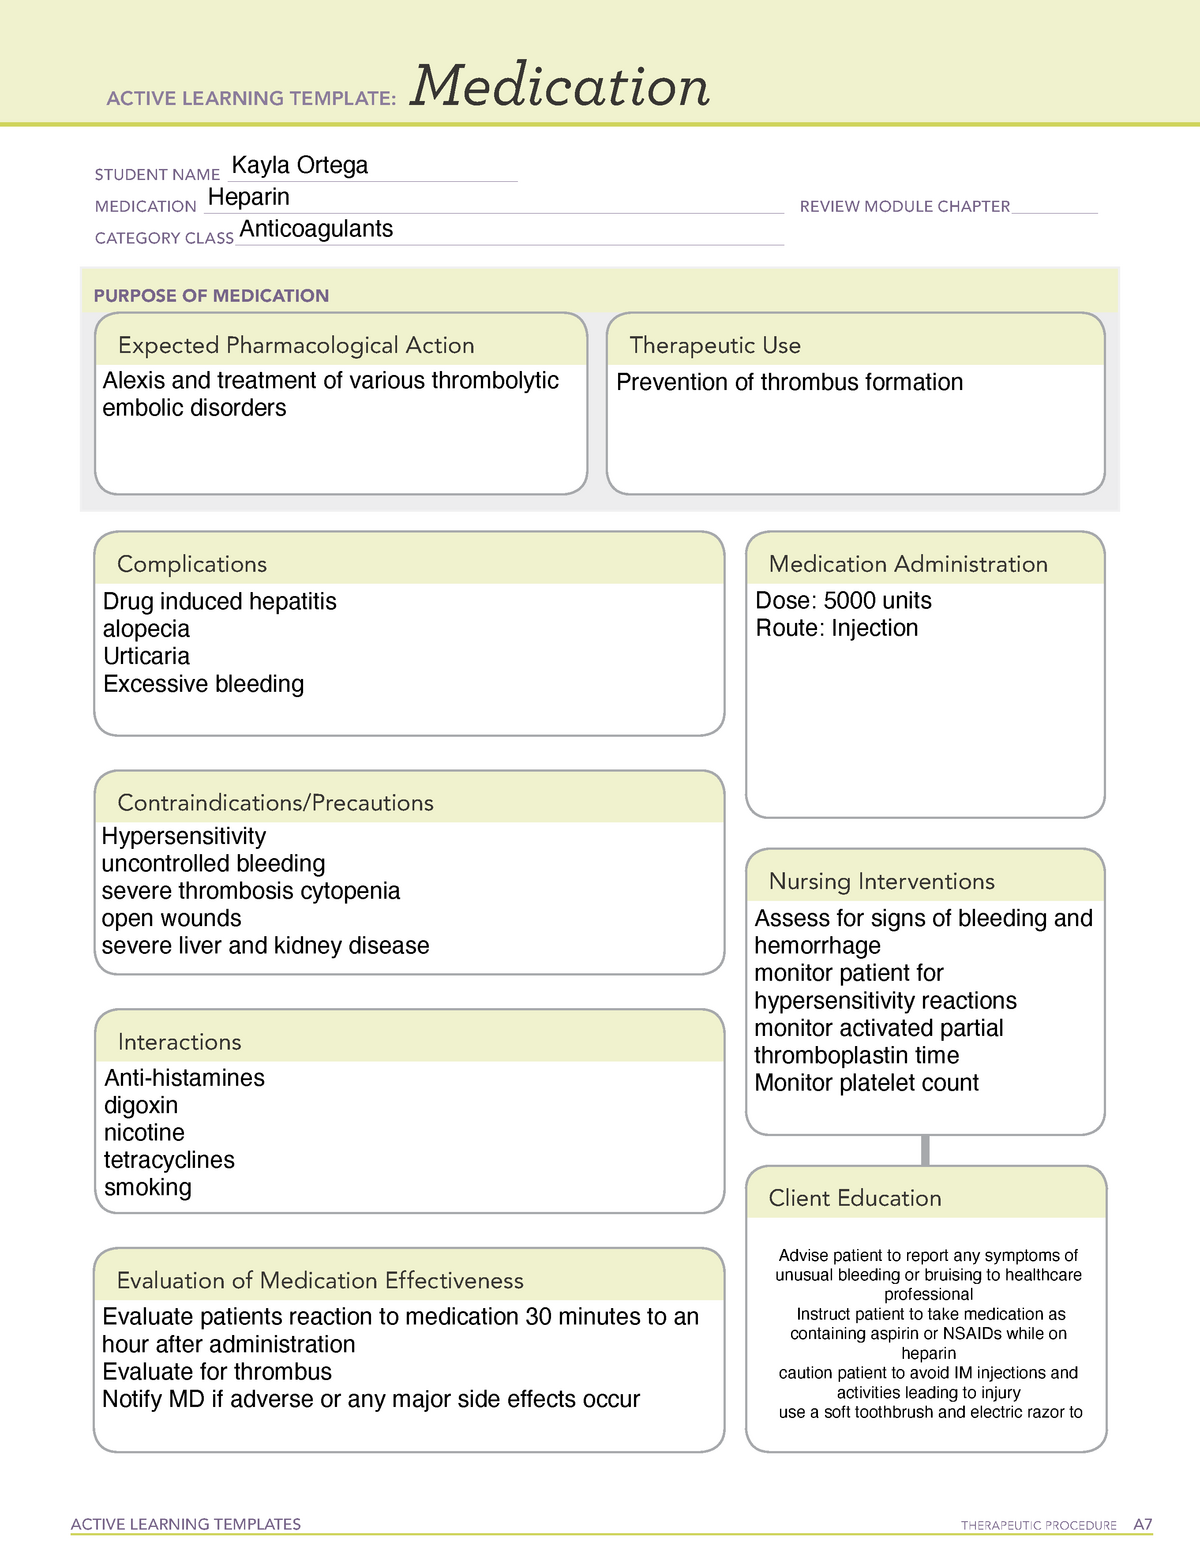 heparin-medication-map-active-learning-templates-therapeutic